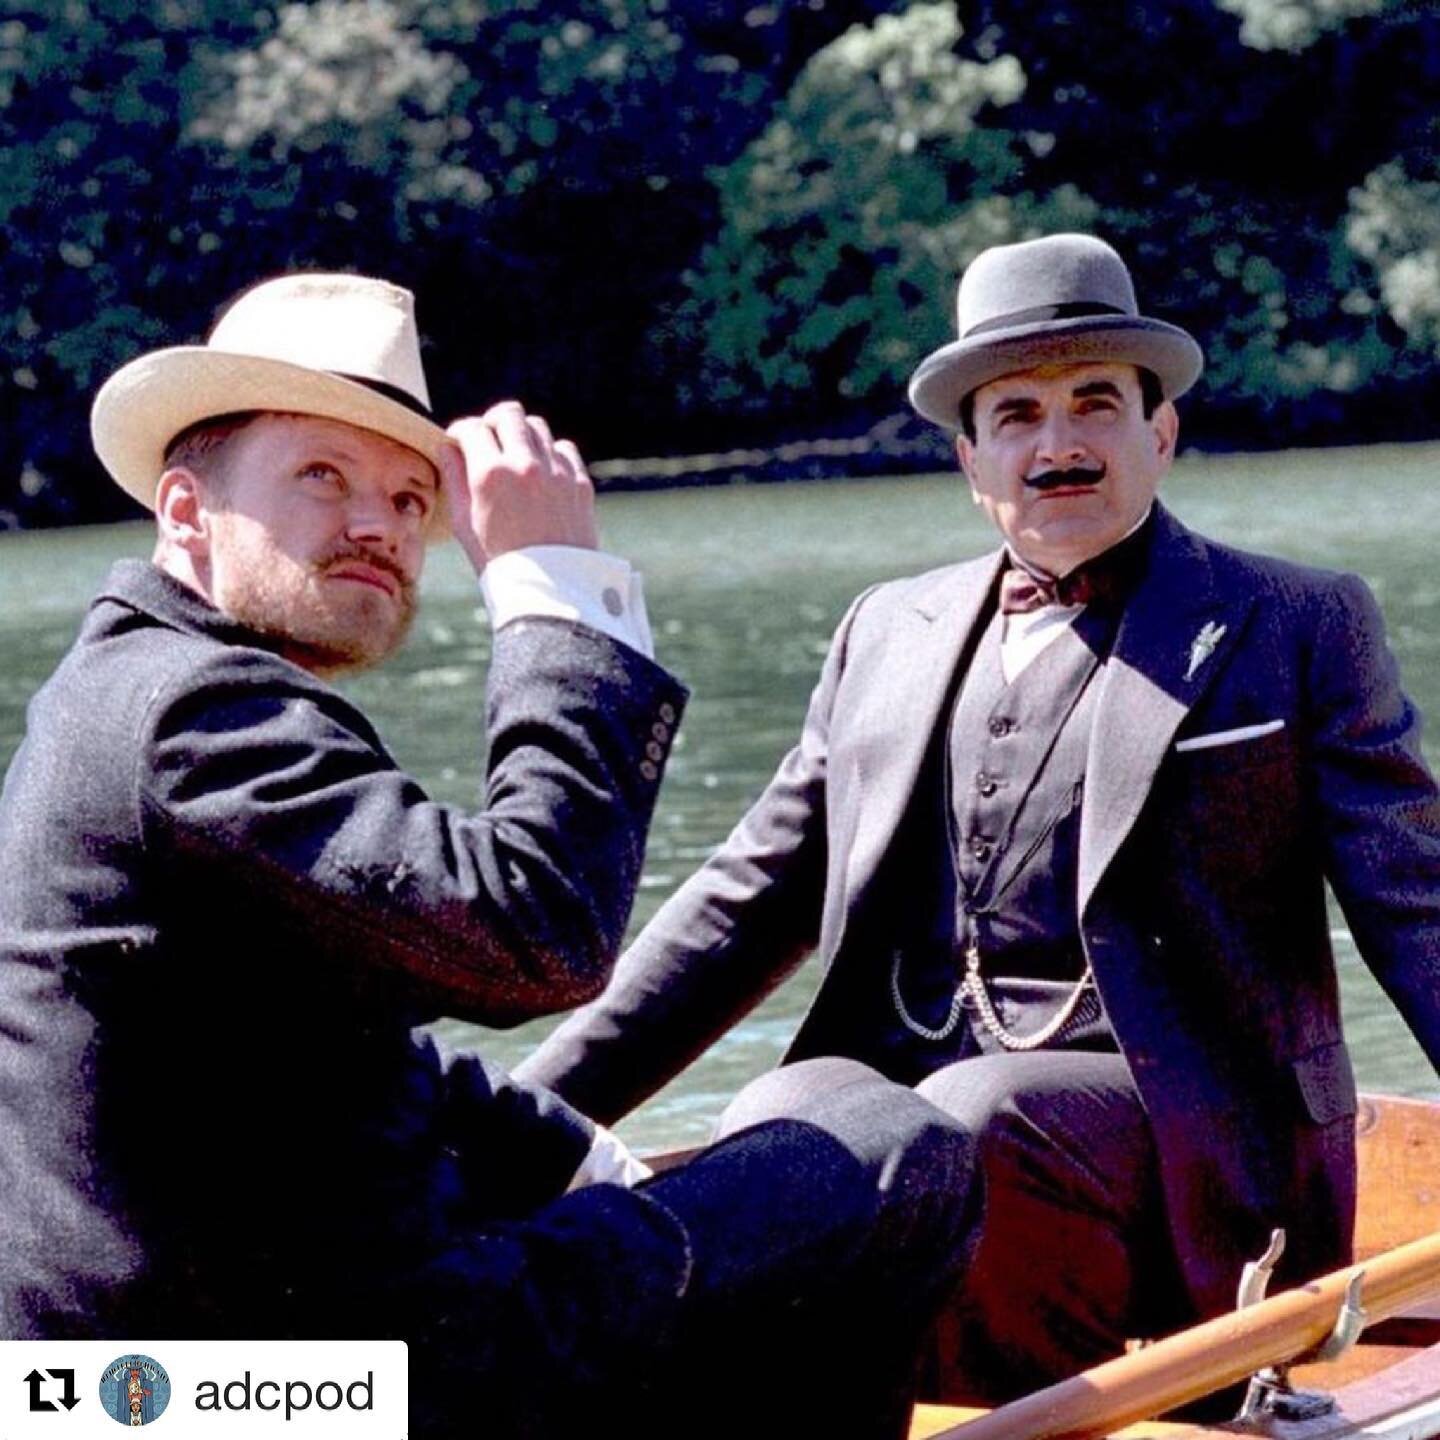 #Repost @adcpod
・・・
🐷 NEW EPISODE! 🐷 This week we cover Agatha Christie&rsquo;s Poirot, Series 9, Episode 1: &ldquo;Five Little Pigs.&rdquo; There are some STRONG FEELINGS about this one! Listen now on Apple Podcasts, Spotify, and Stitcher.
&bull;
